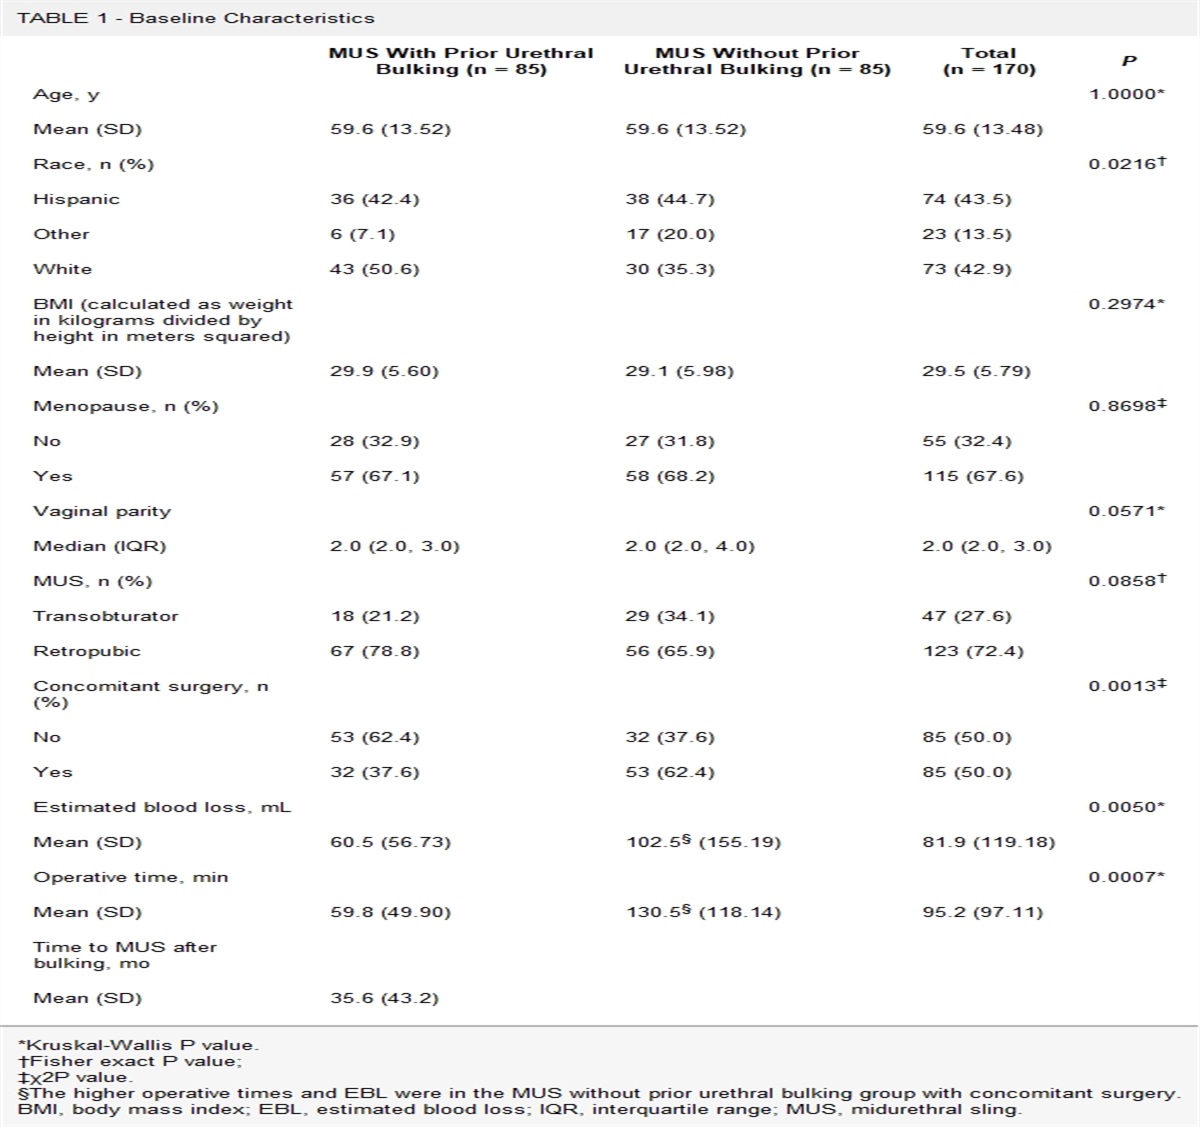 Retreatment of Stress Urinary Incontinence After Midurethral Sling With Prior Urethral Bulking